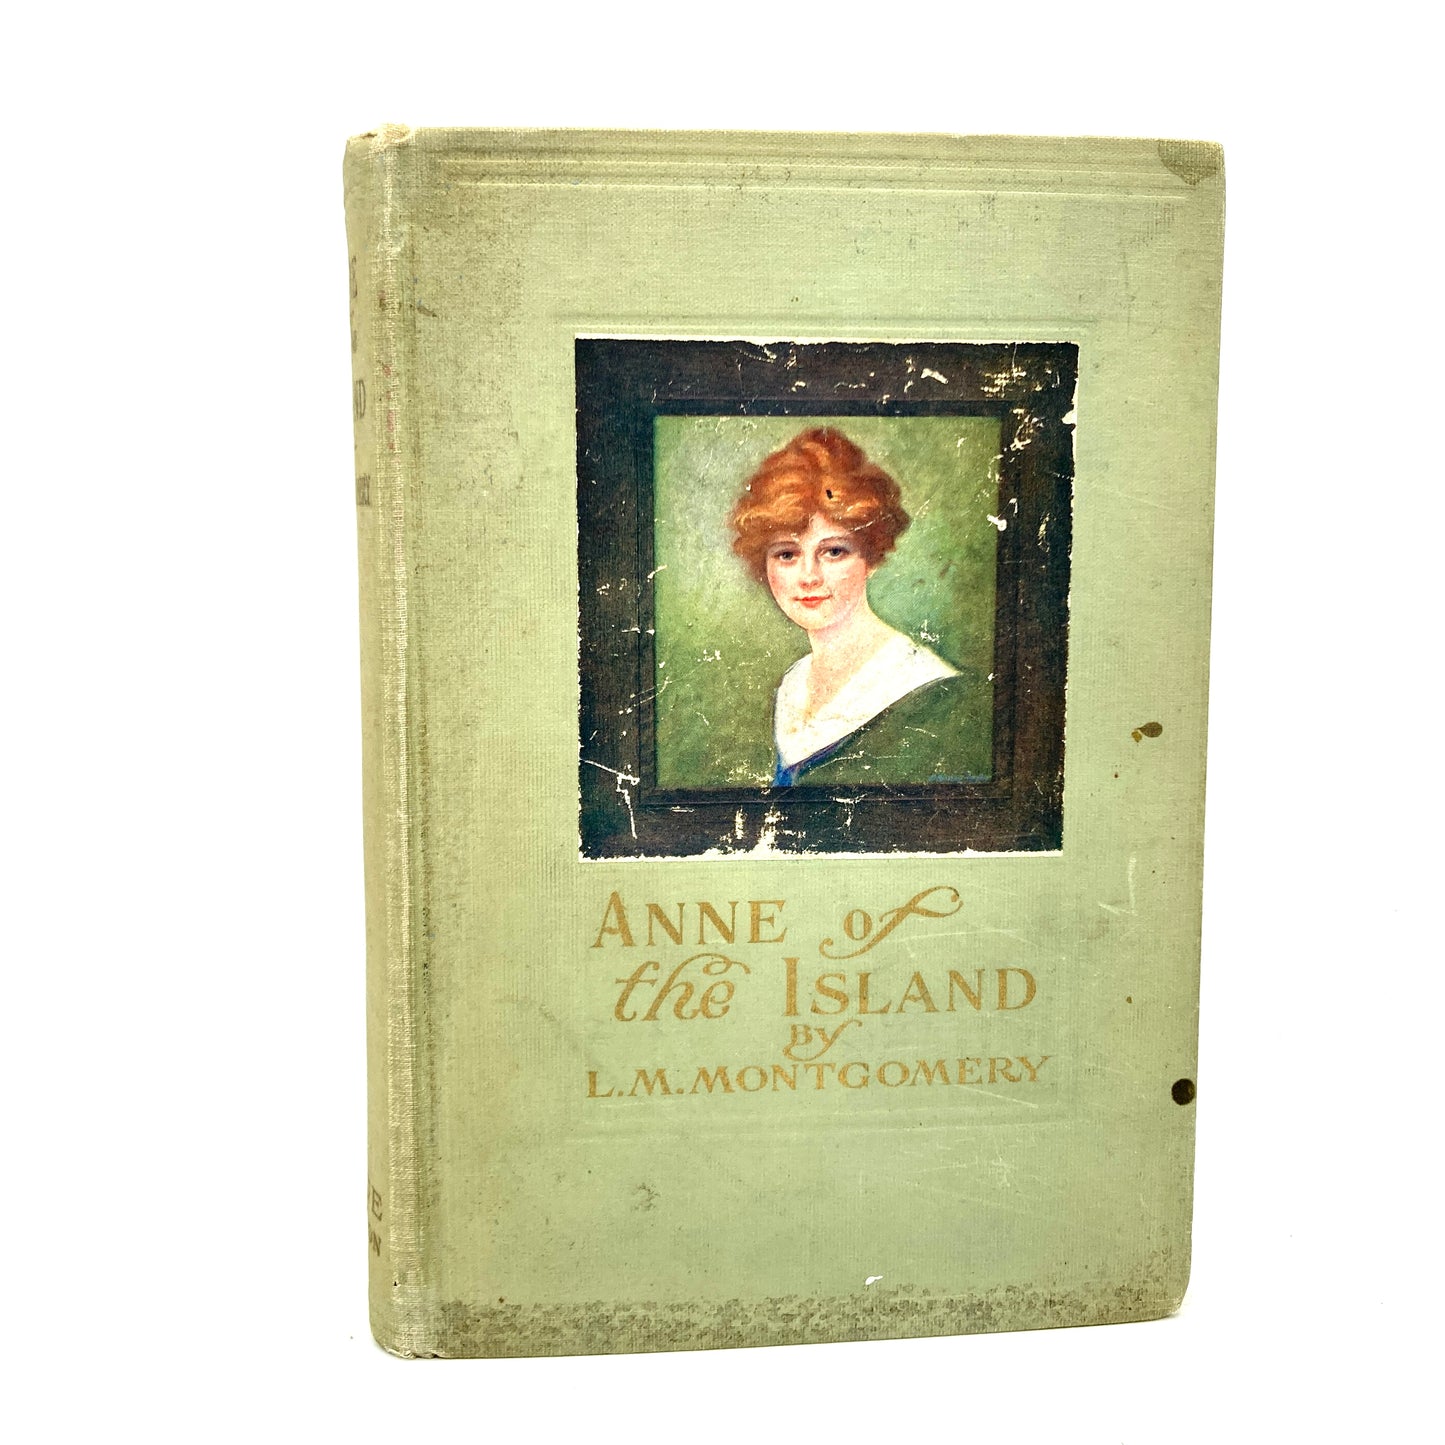 MONTGOMERY, L.M. "Anne of the Island" [LC Page, 1915] 1st Edition/2nd - Buzz Bookstore